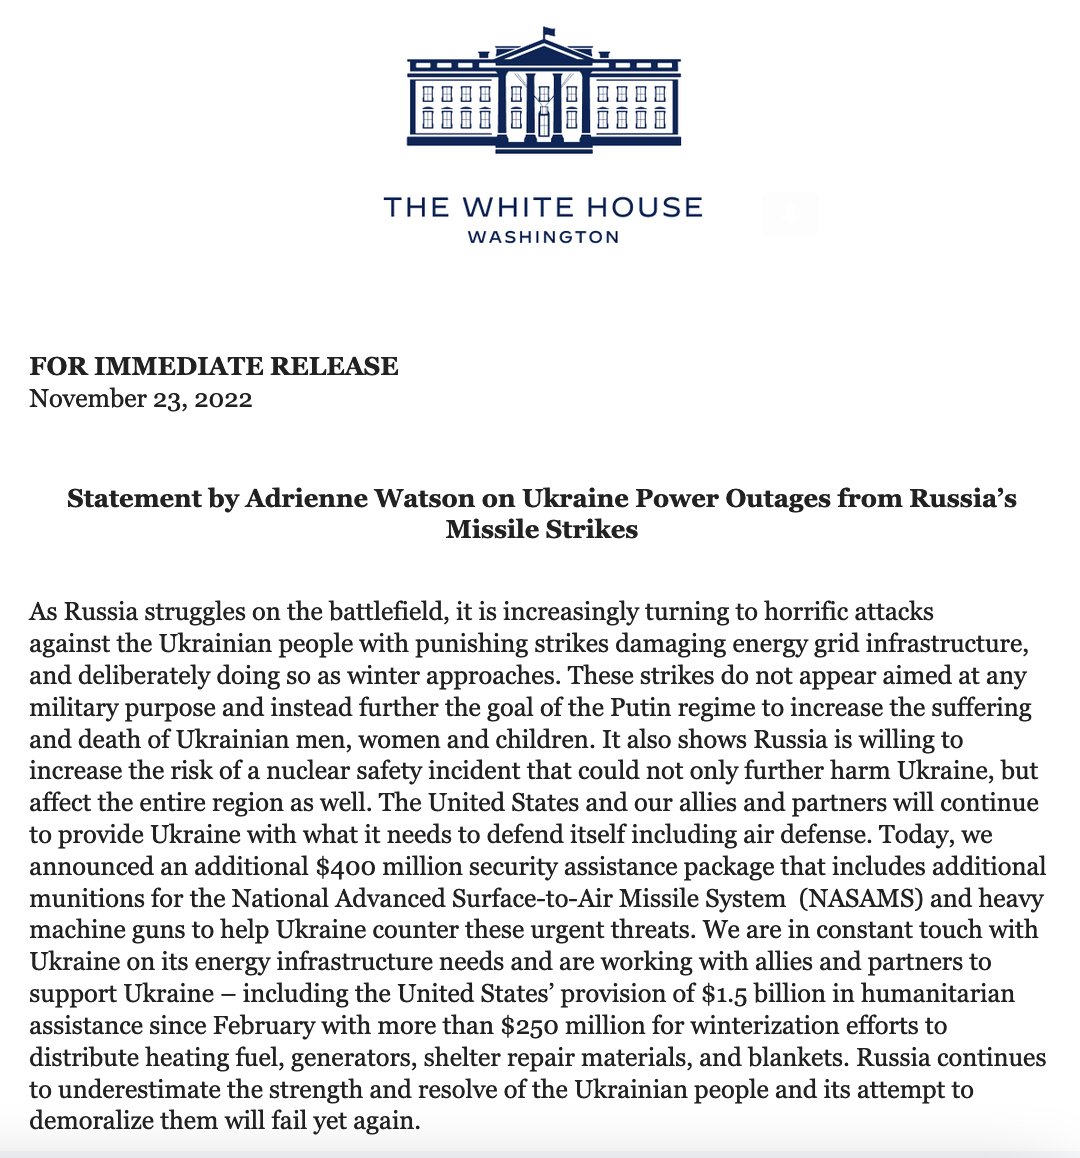 White House NSC Statement on Ukraine Power Outages from Russia's Missile Strikes